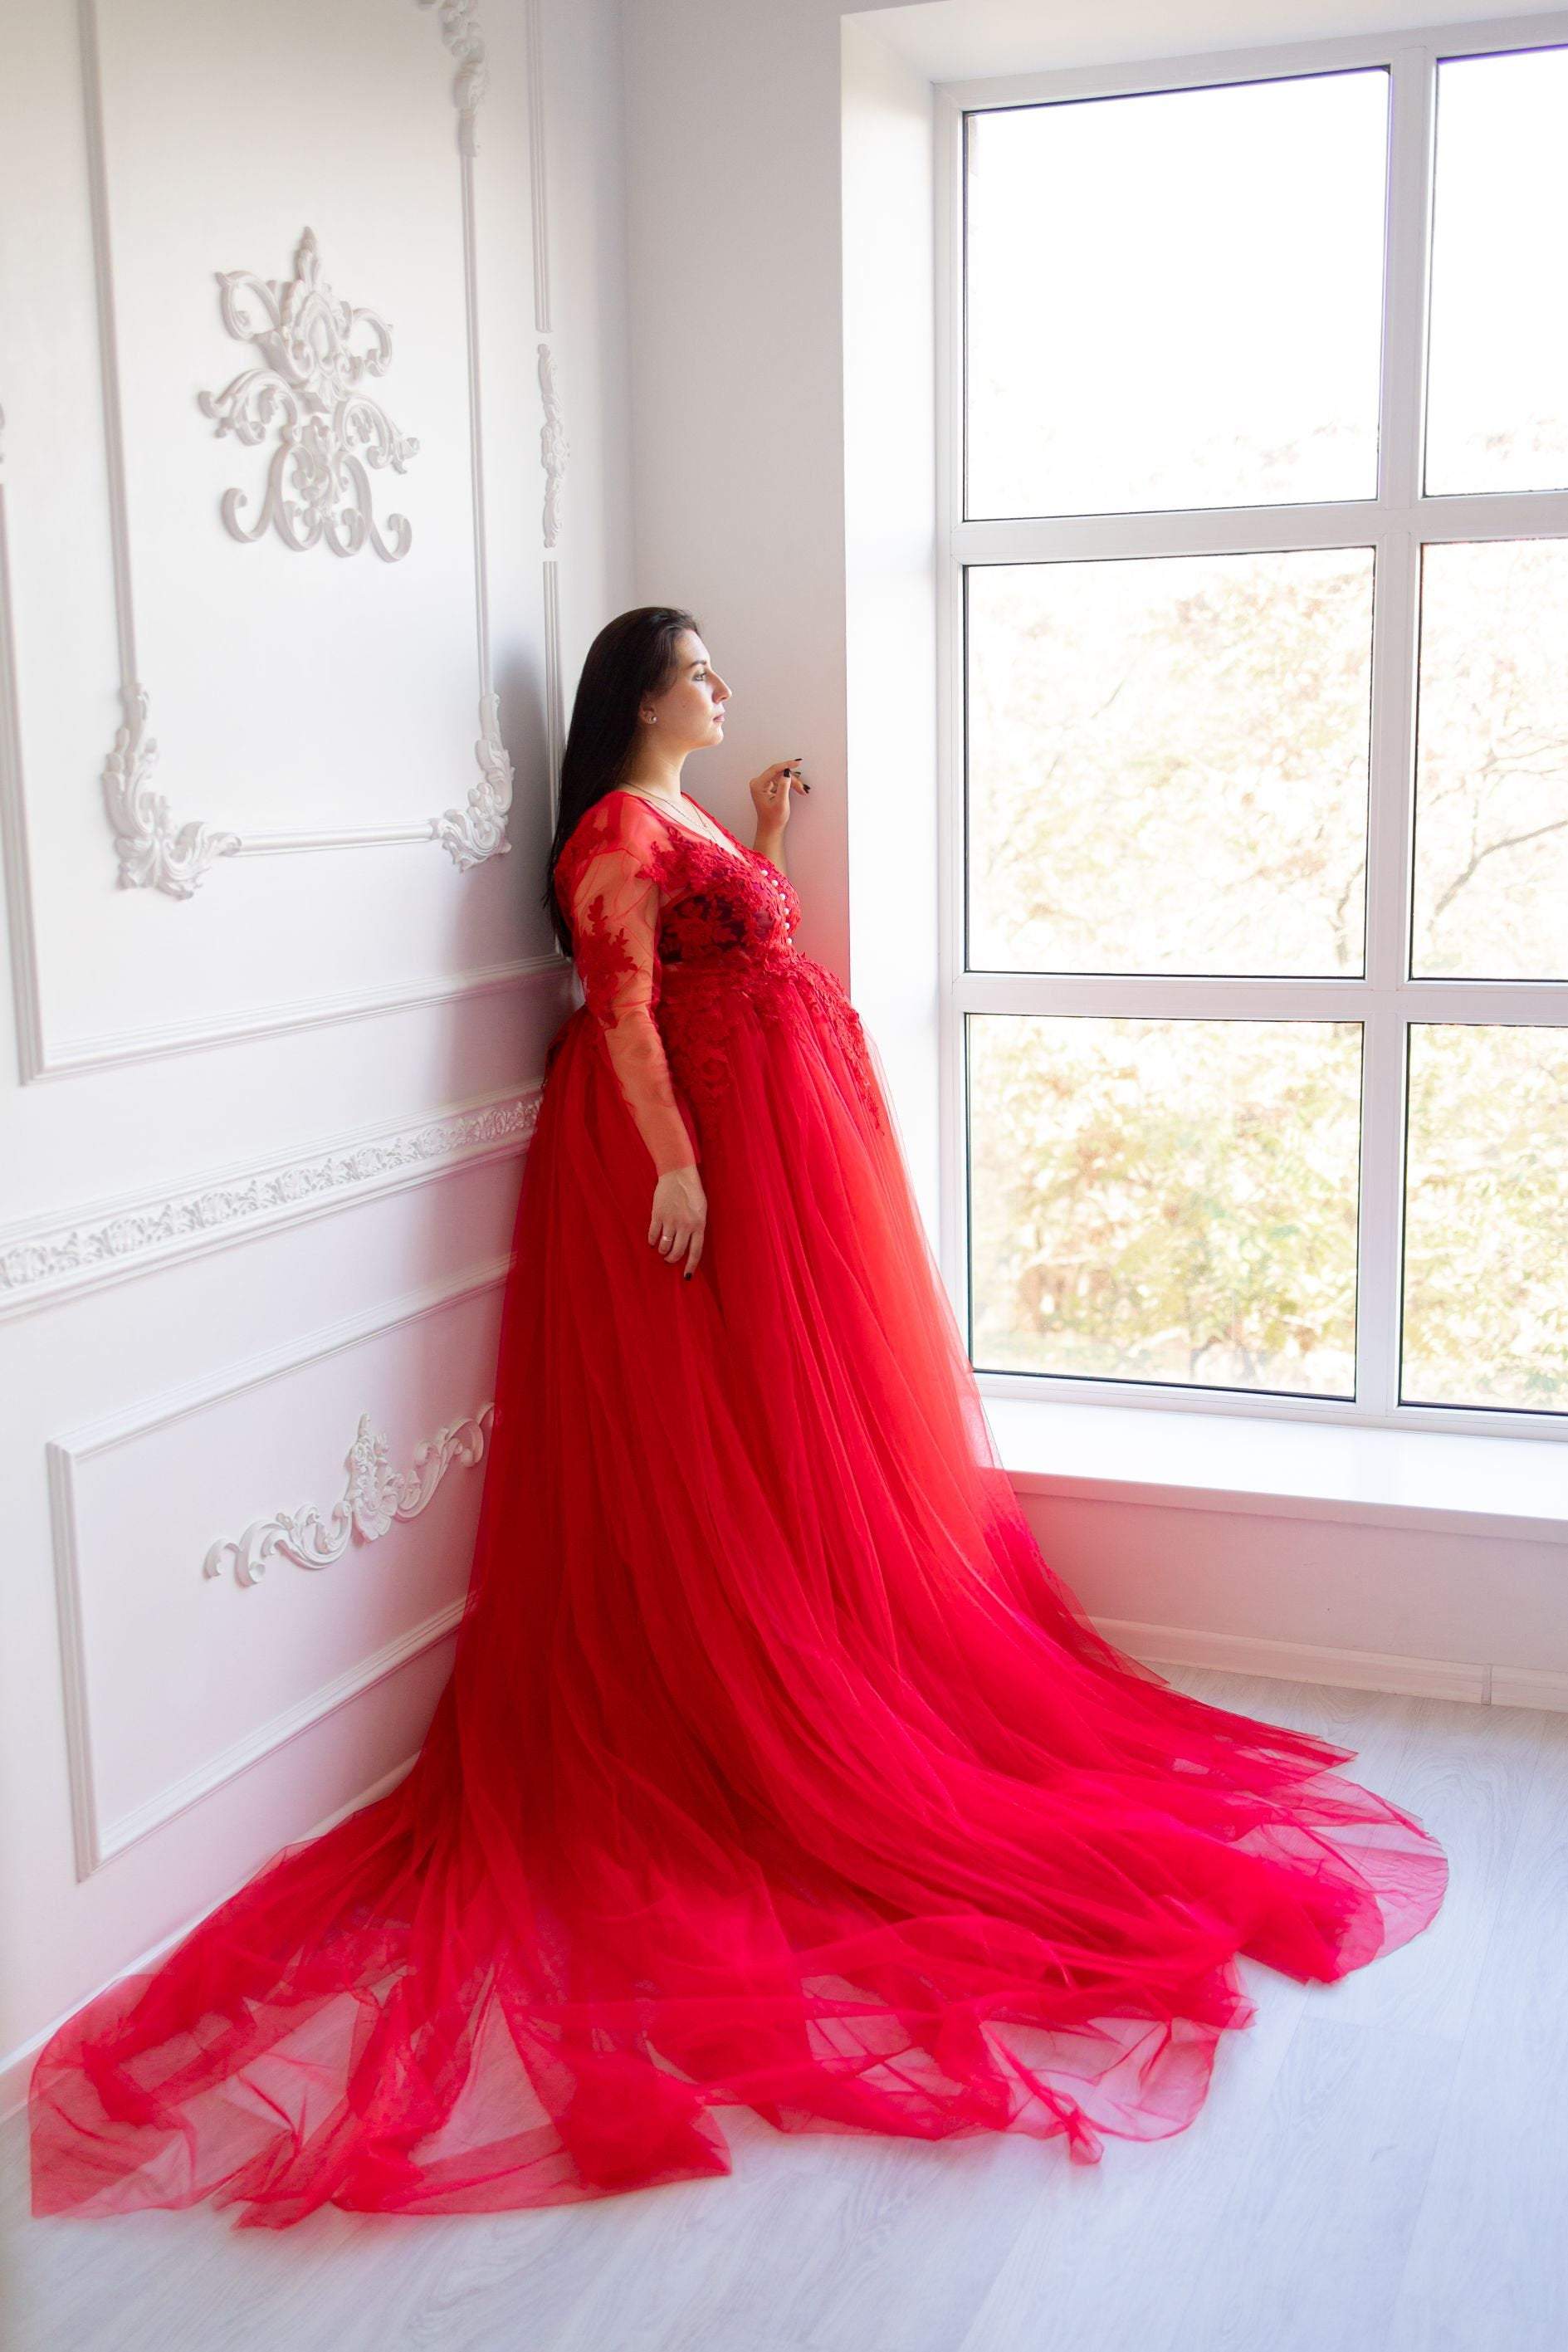 Stunning Bright Red Wedding Dress With Elegant Cape Veil Made to Order, Red  Bridal Gown With Plunge Neck With or Without Matching Veil - Etsy